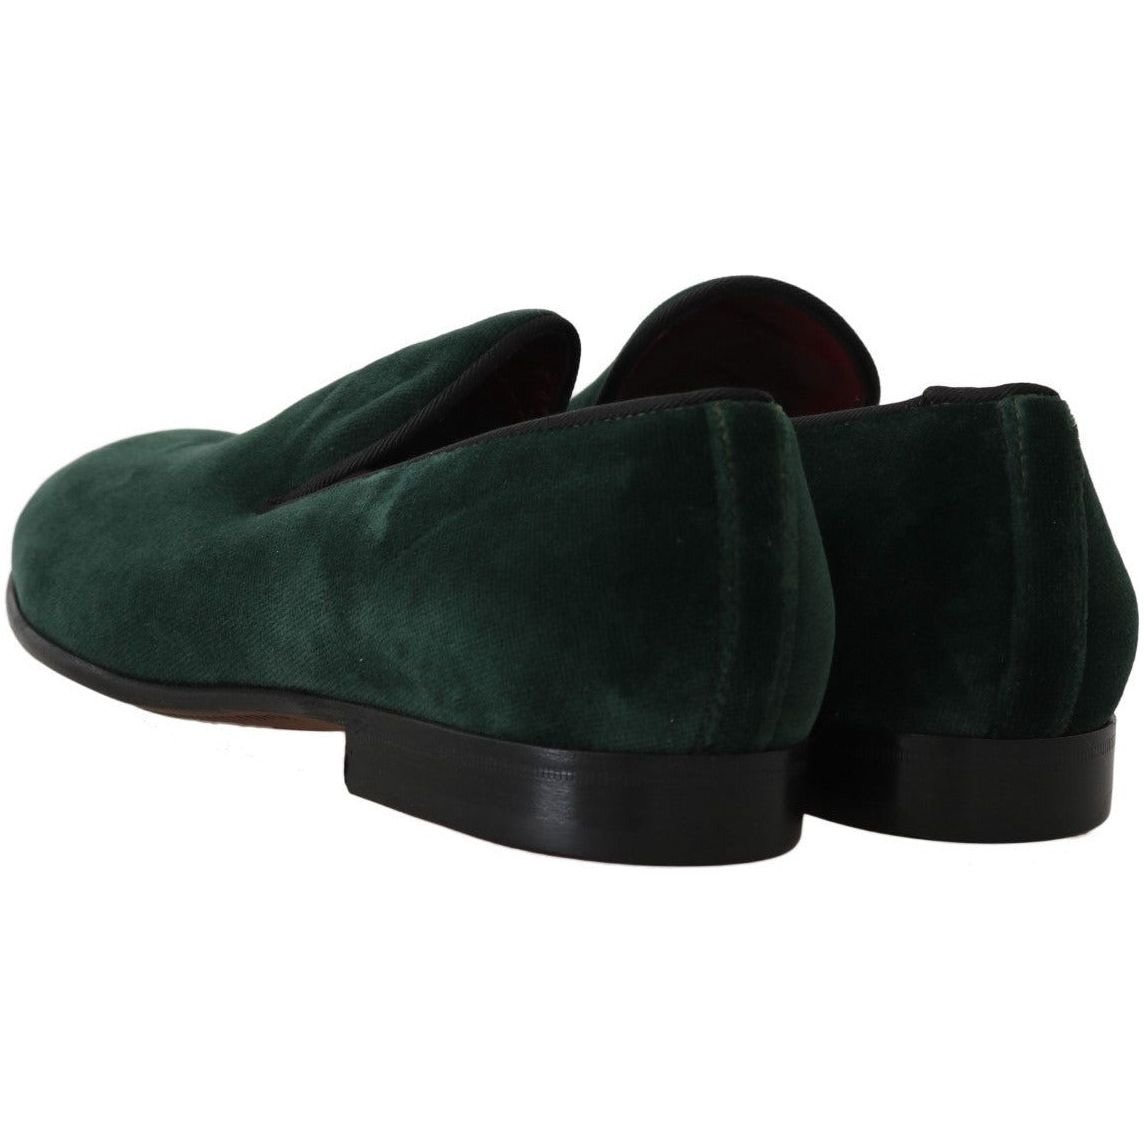 Dolce & Gabbana Elegant Green Suede Slip-On Loafers green-suede-leather-slippers-loafers